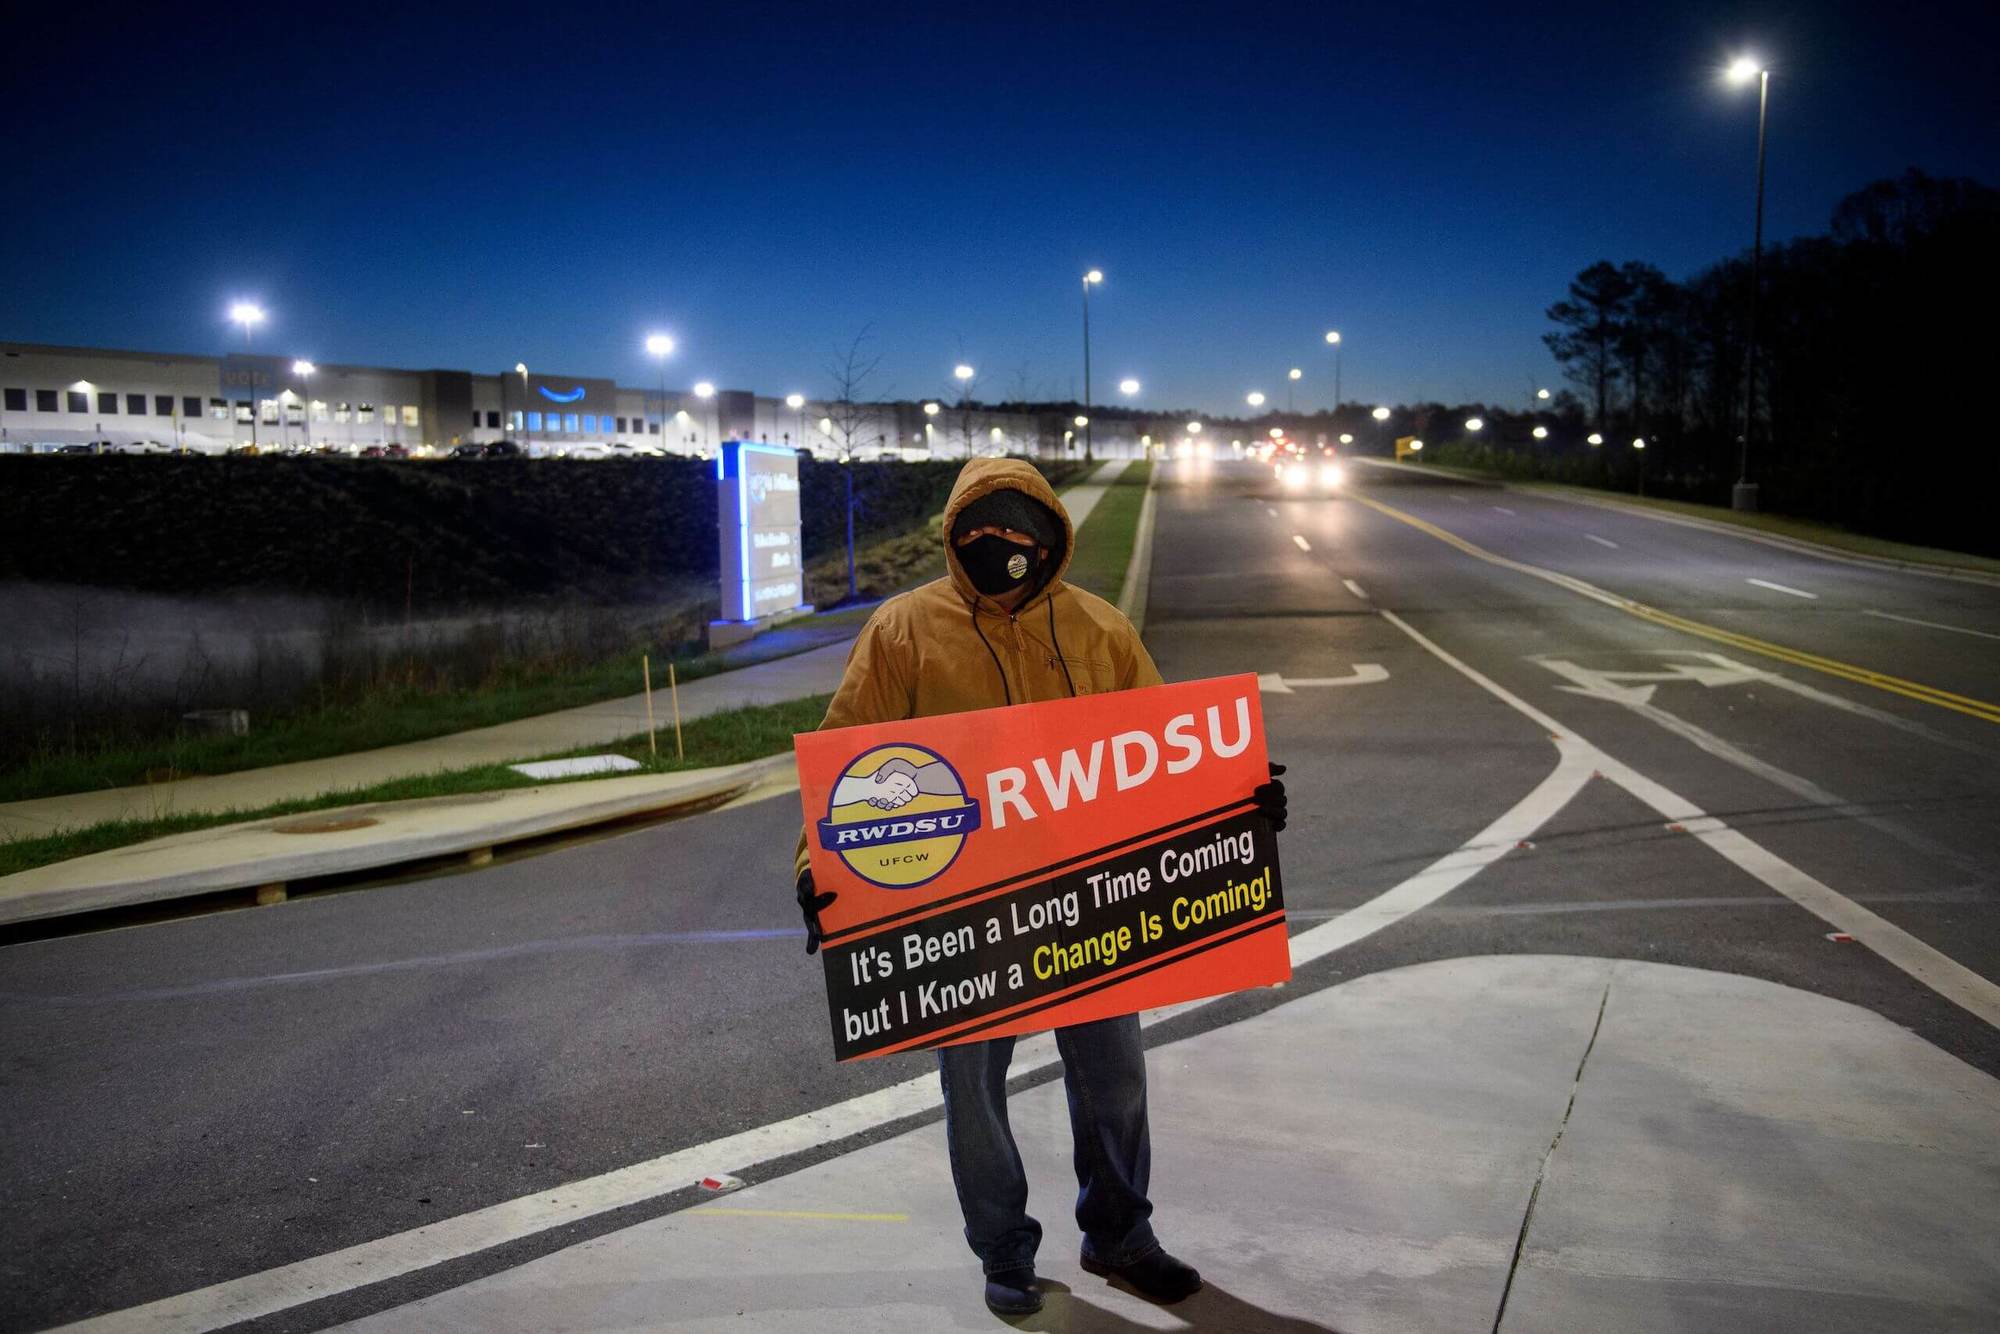 A union supporter stands before sunrise outside the Amazon.com, Inc. BHM1 fulfillment center on March 29, 2021 in Bessemer, Alabama. April 2021